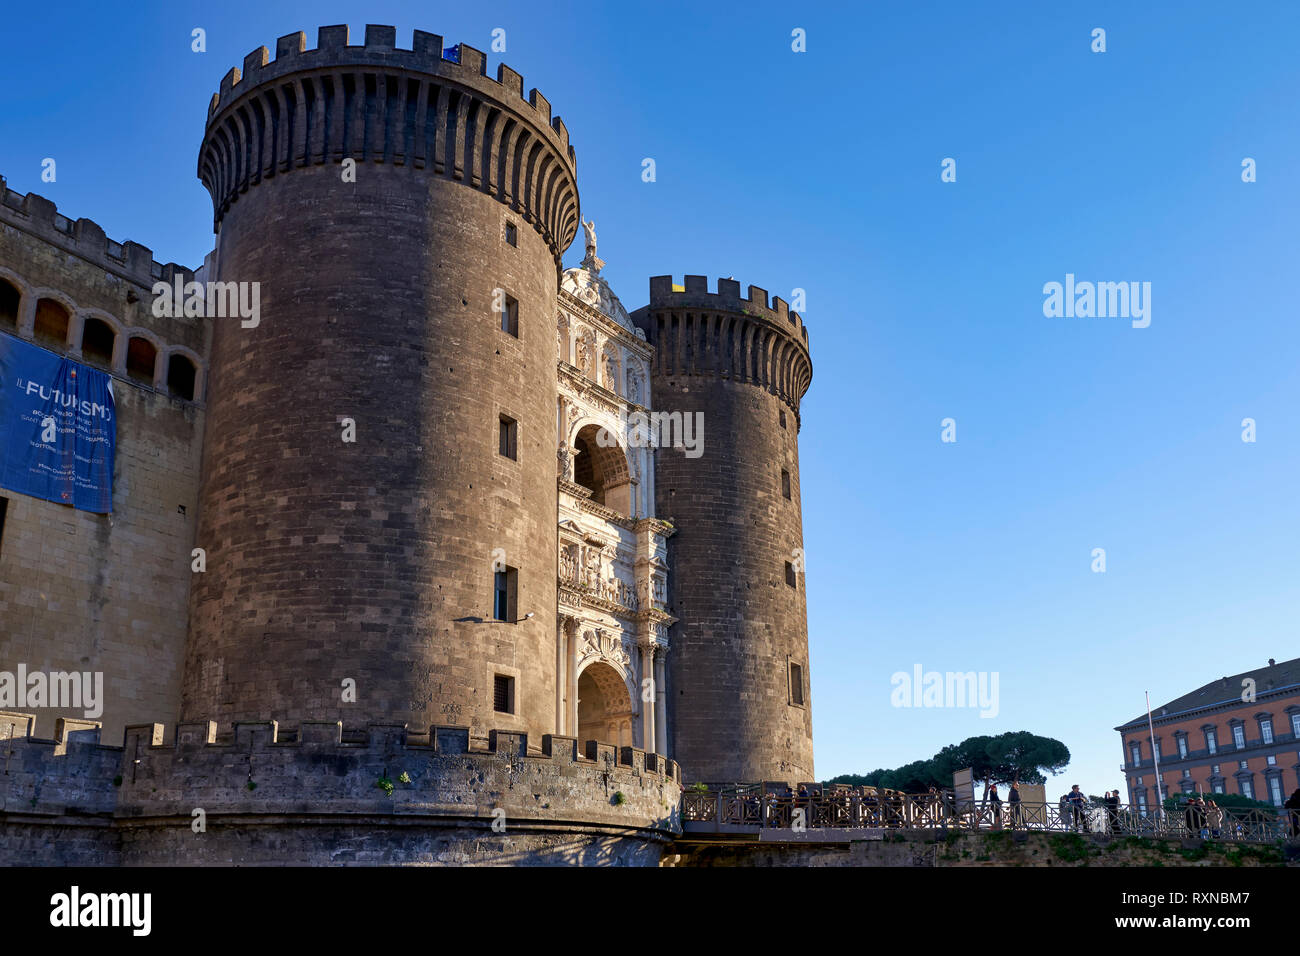 Naples, Campania, Italy. Castel Nuovo (New Castle), often called Maschio Angioino, is a medieval castle located in front of Piazza Municipio and the c Stock Photo